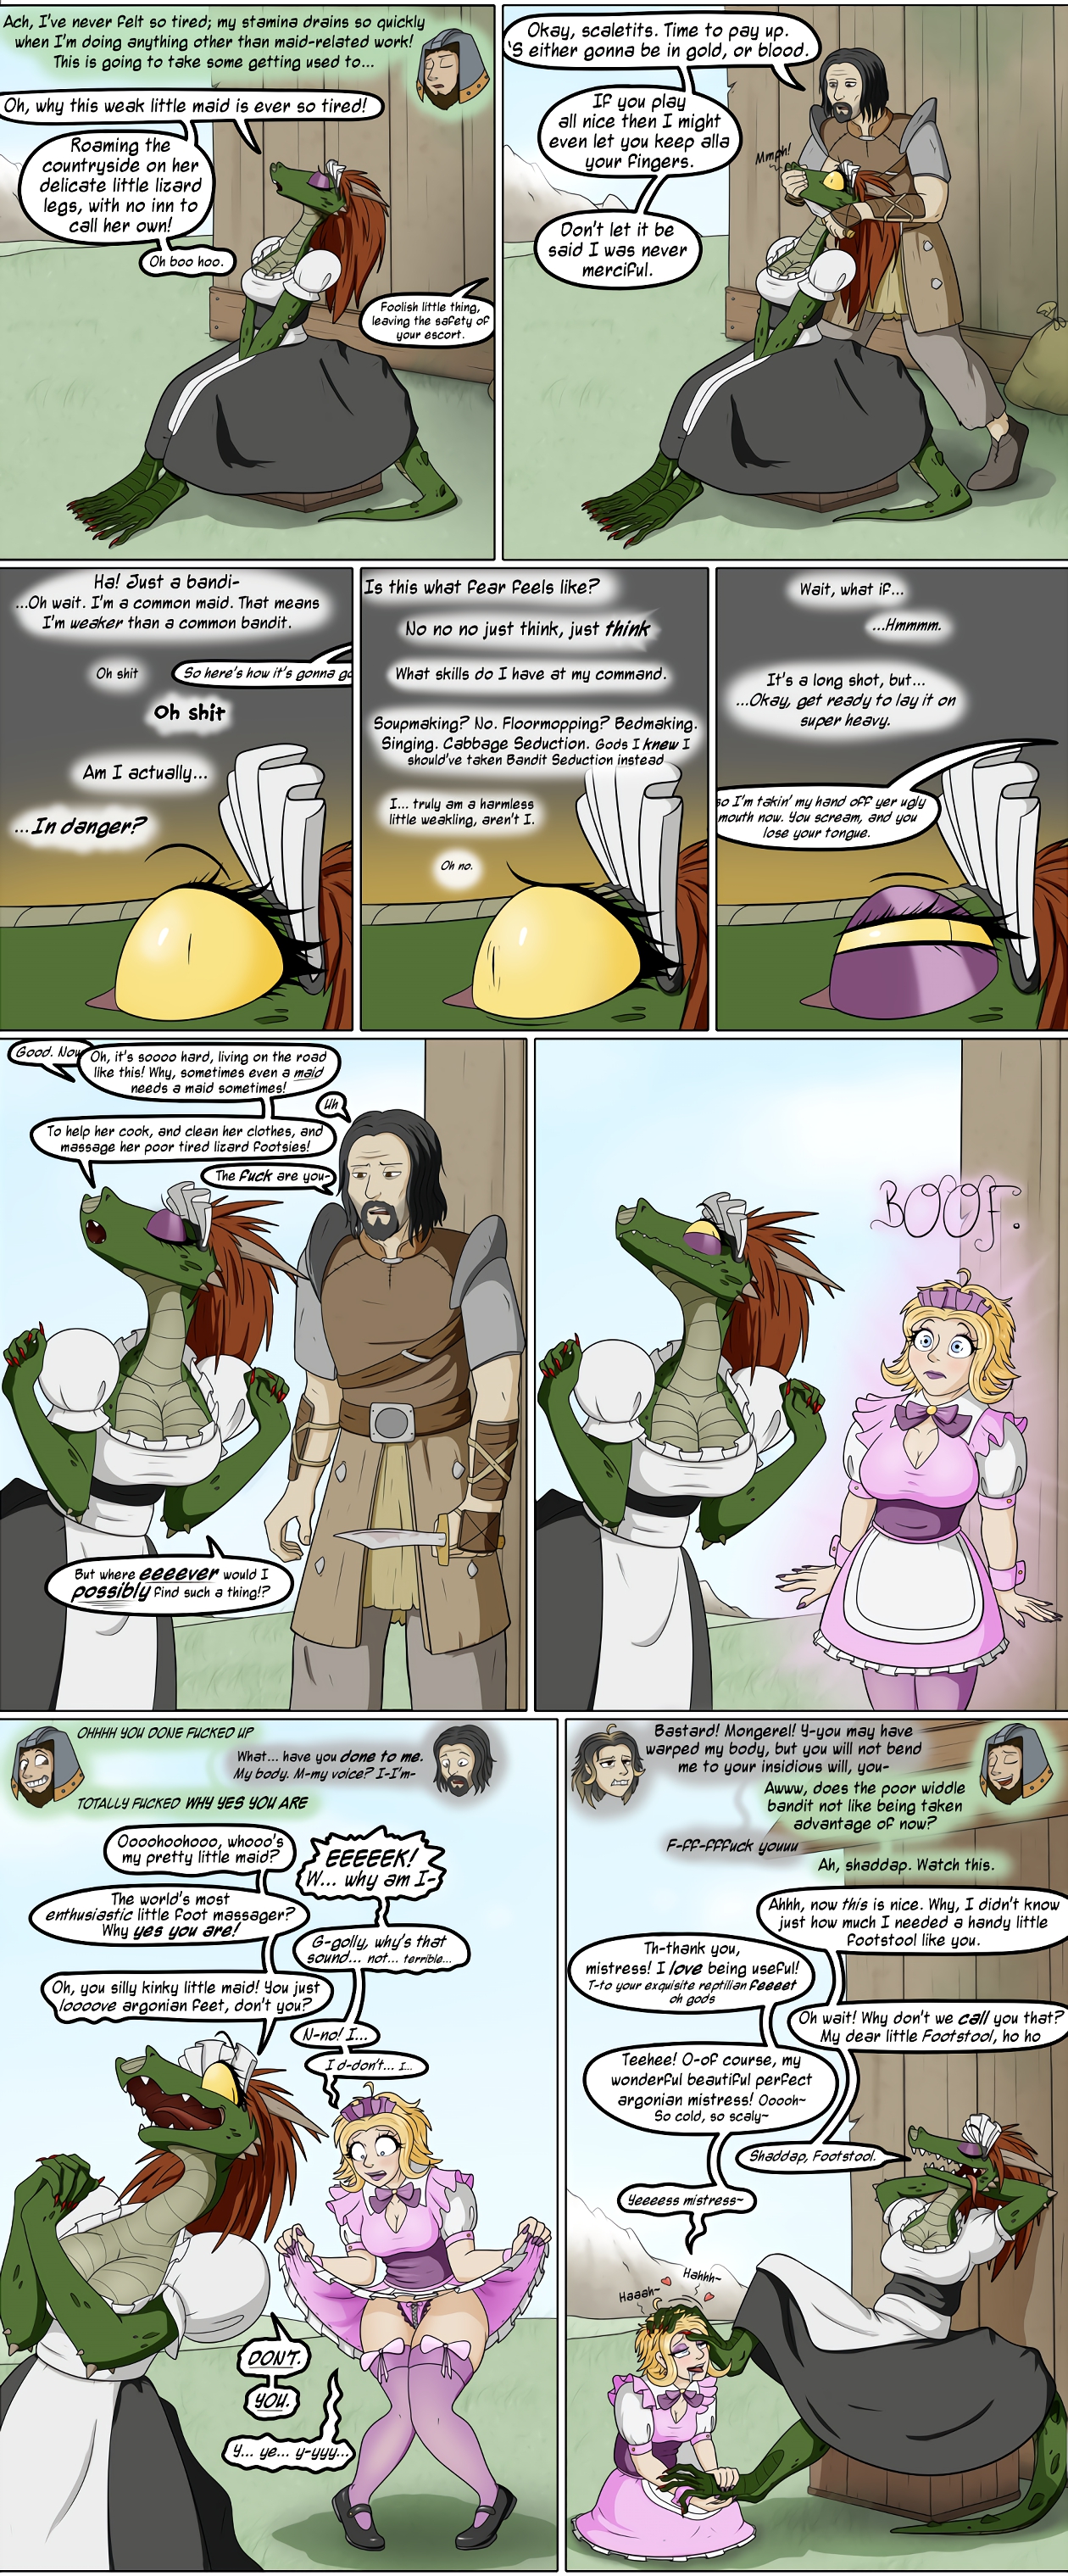 Funny adult humor Lusty Argonian Maid'd Porn jokes and memes